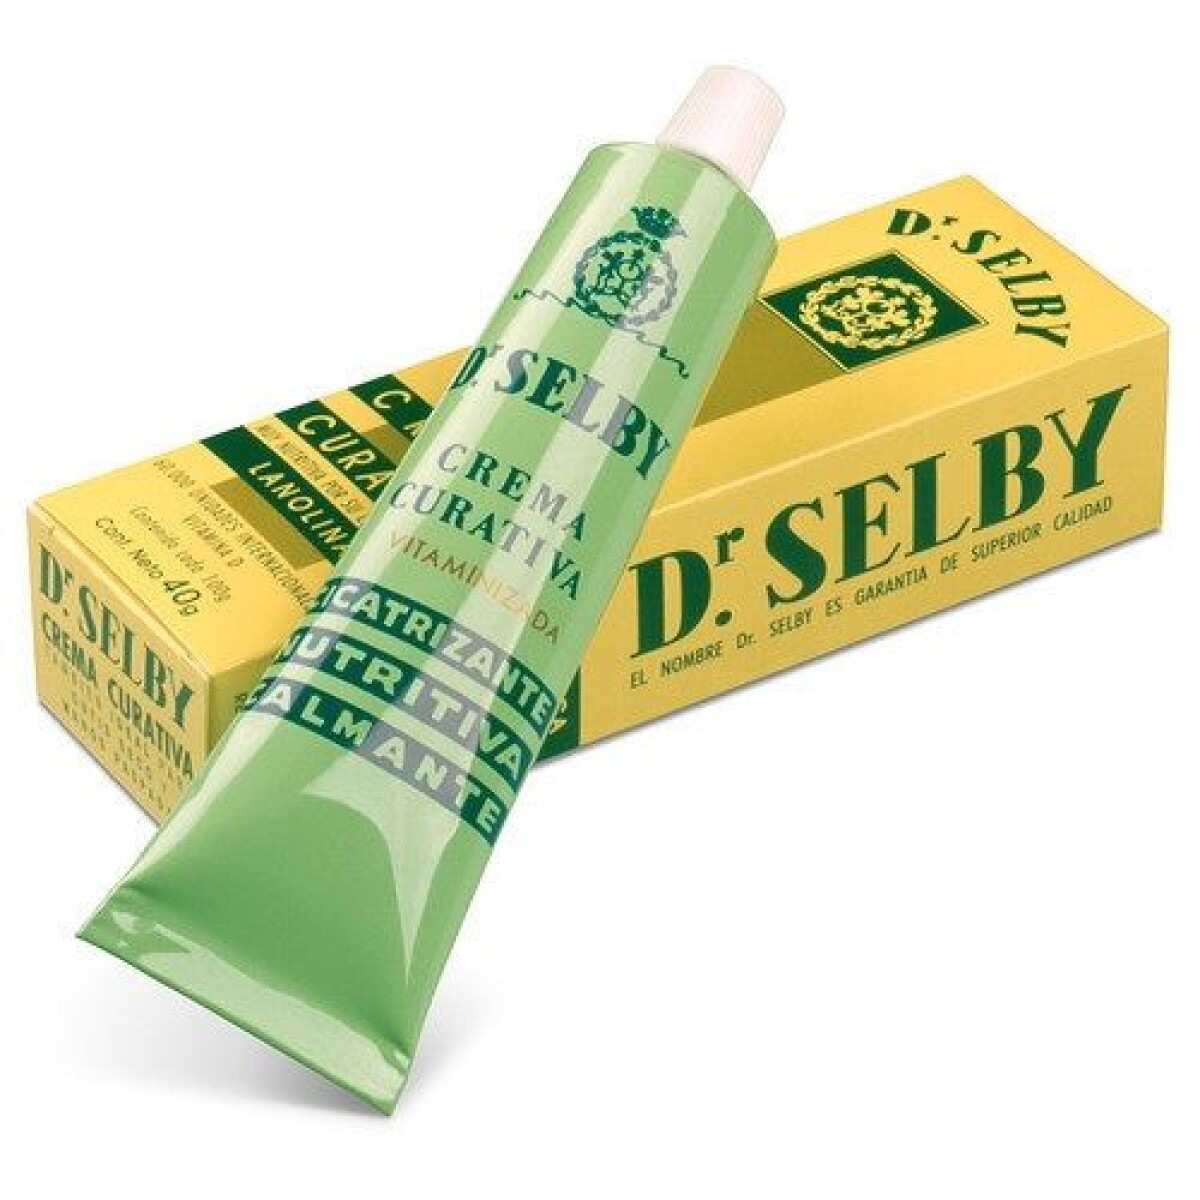 CREMA CURATIVA DR SELBY 40 GR 